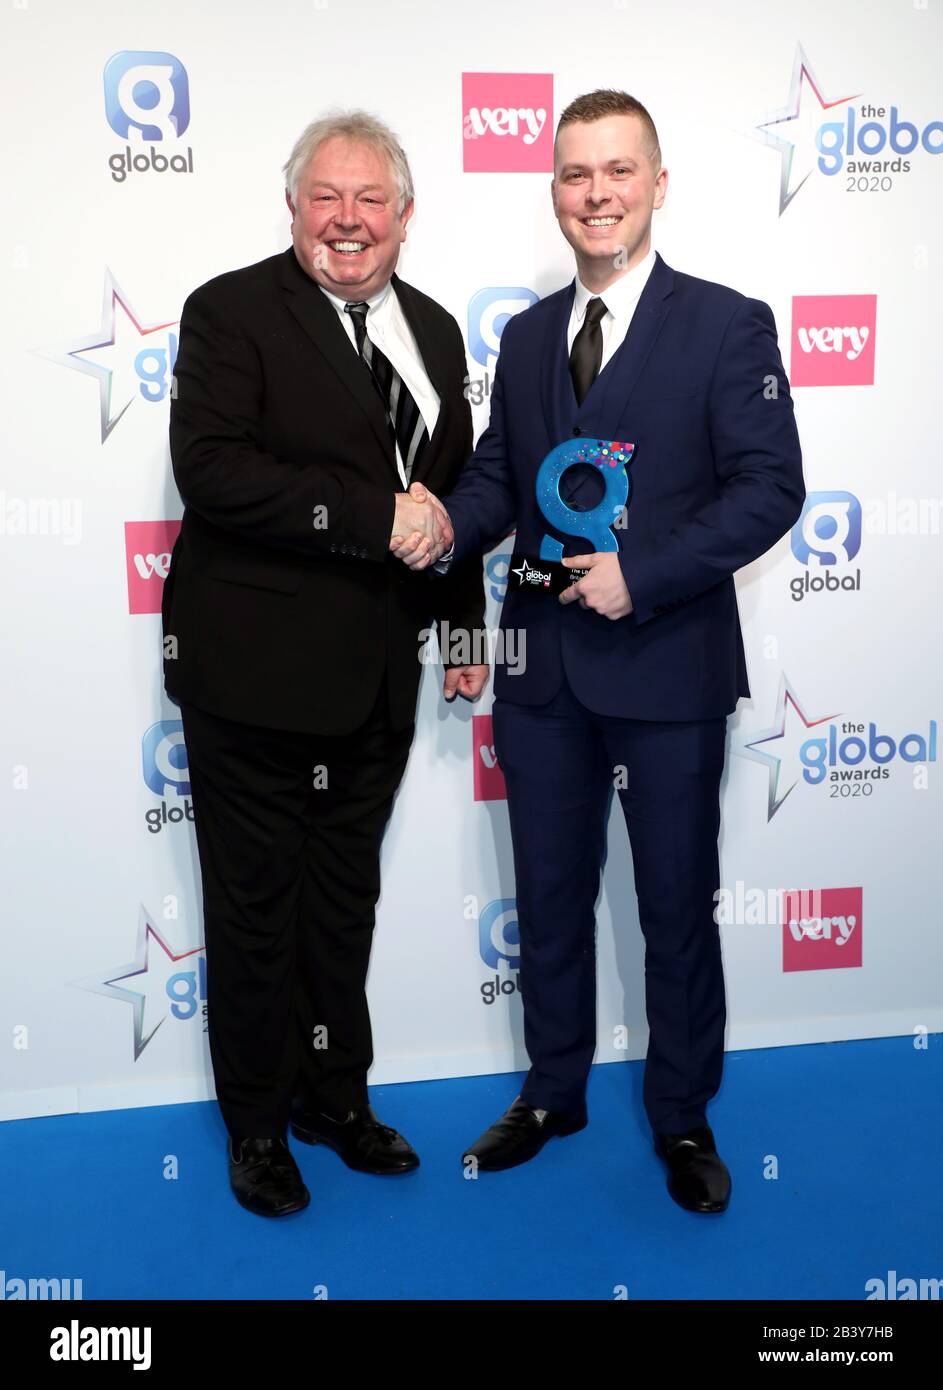 Nick Ferrari (left) with Stuart Outten winner of The LBC Award Britain's Bravest Police Officer at The Global Awards 2020 with Very.co.uk at London's Eventim Apollo Hammersmith. Stock Photo